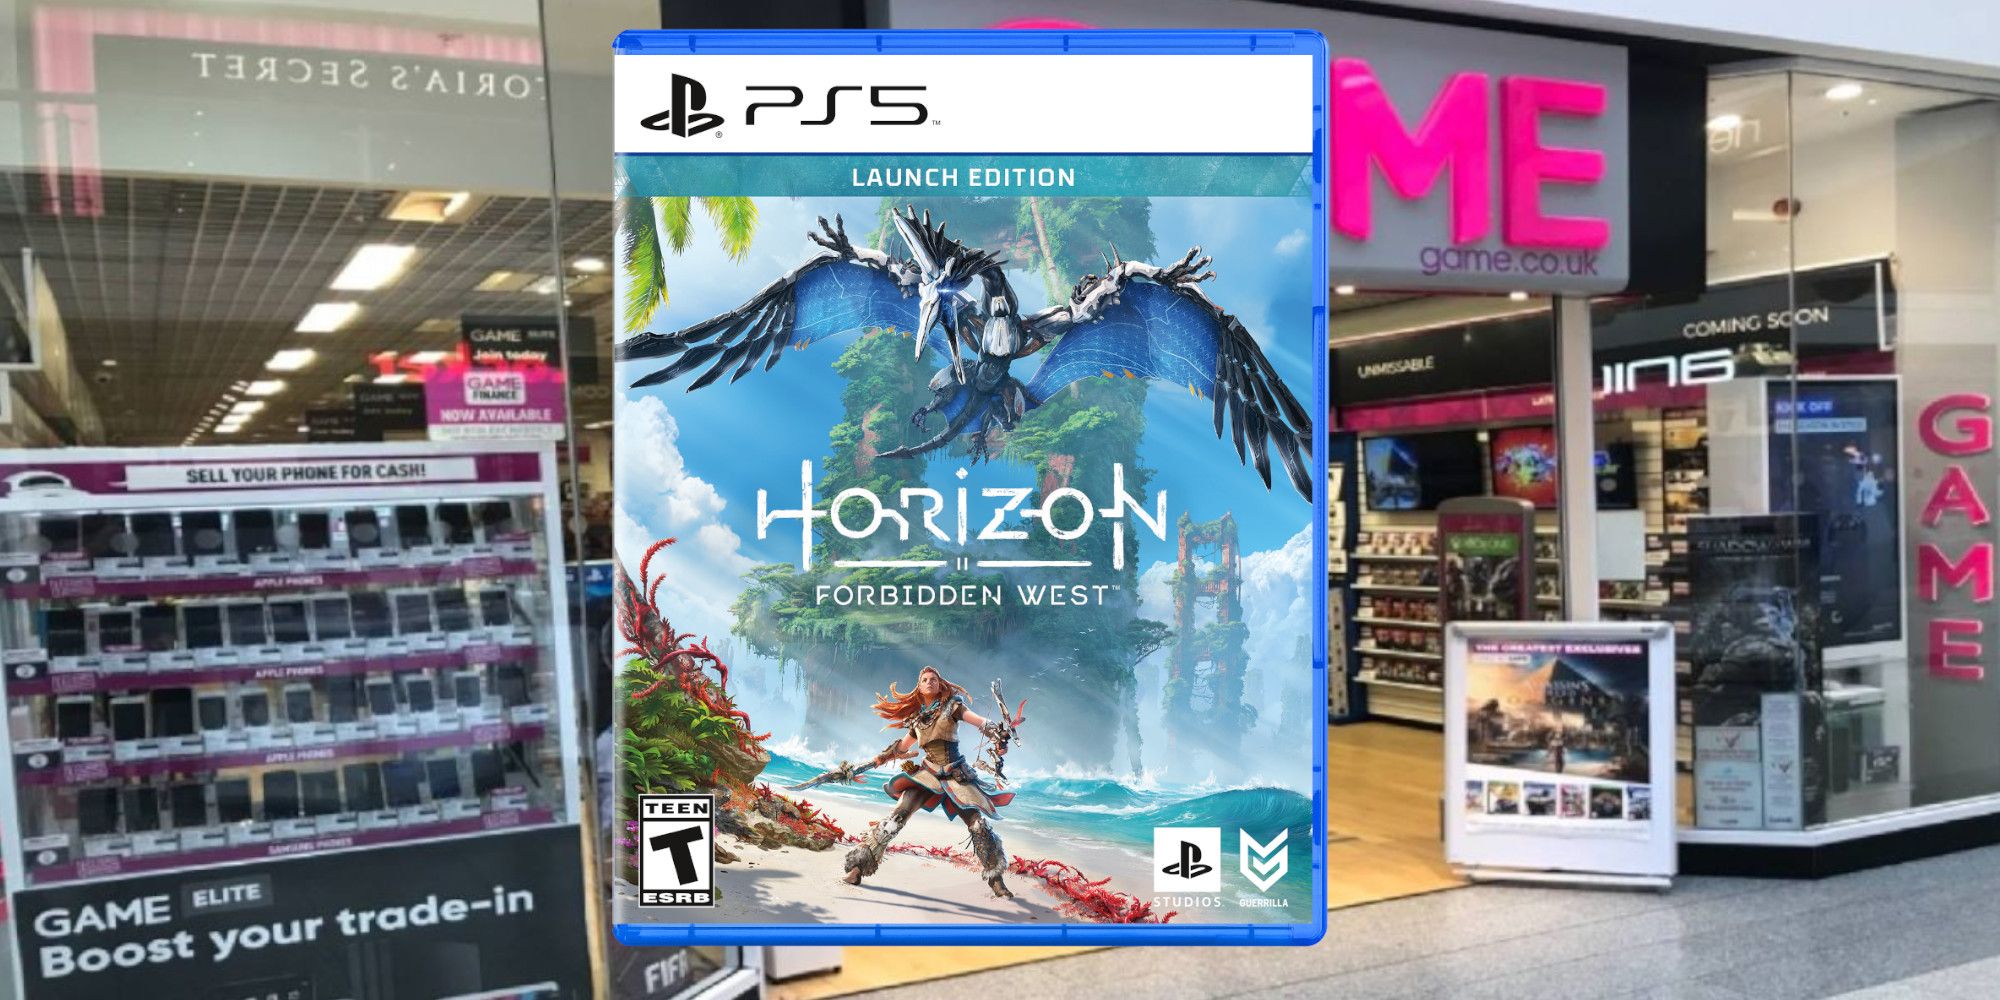 Horizon Forbidden West review: a PS5 showcase obsessed with 'more' - Polygon